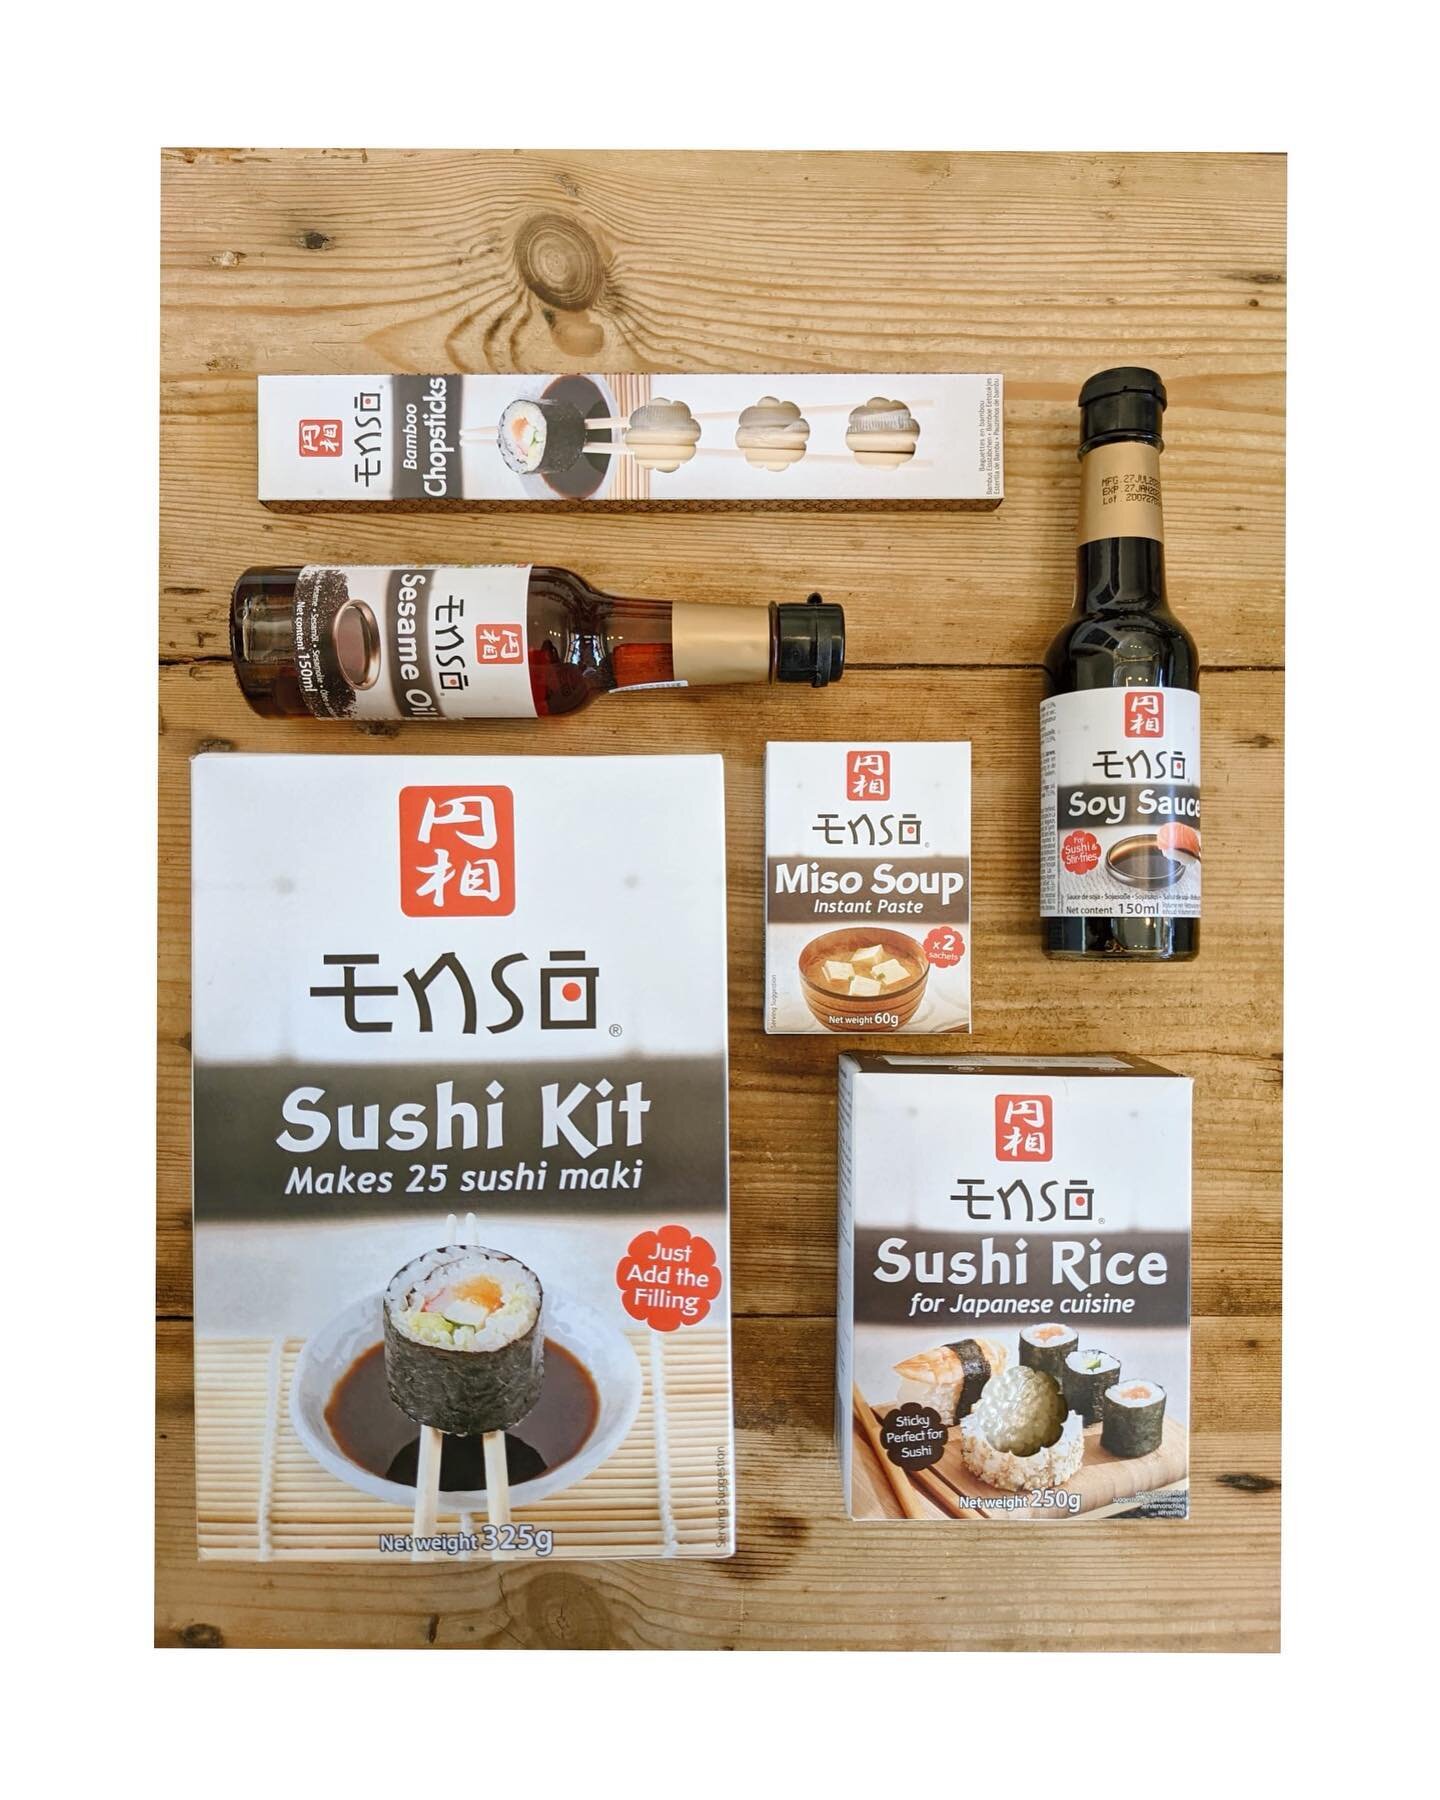 Anyone want to join for Sushi Night? Let&rsquo;s make it all!! 

#sushi #shoplocal #castelldefelsplaya